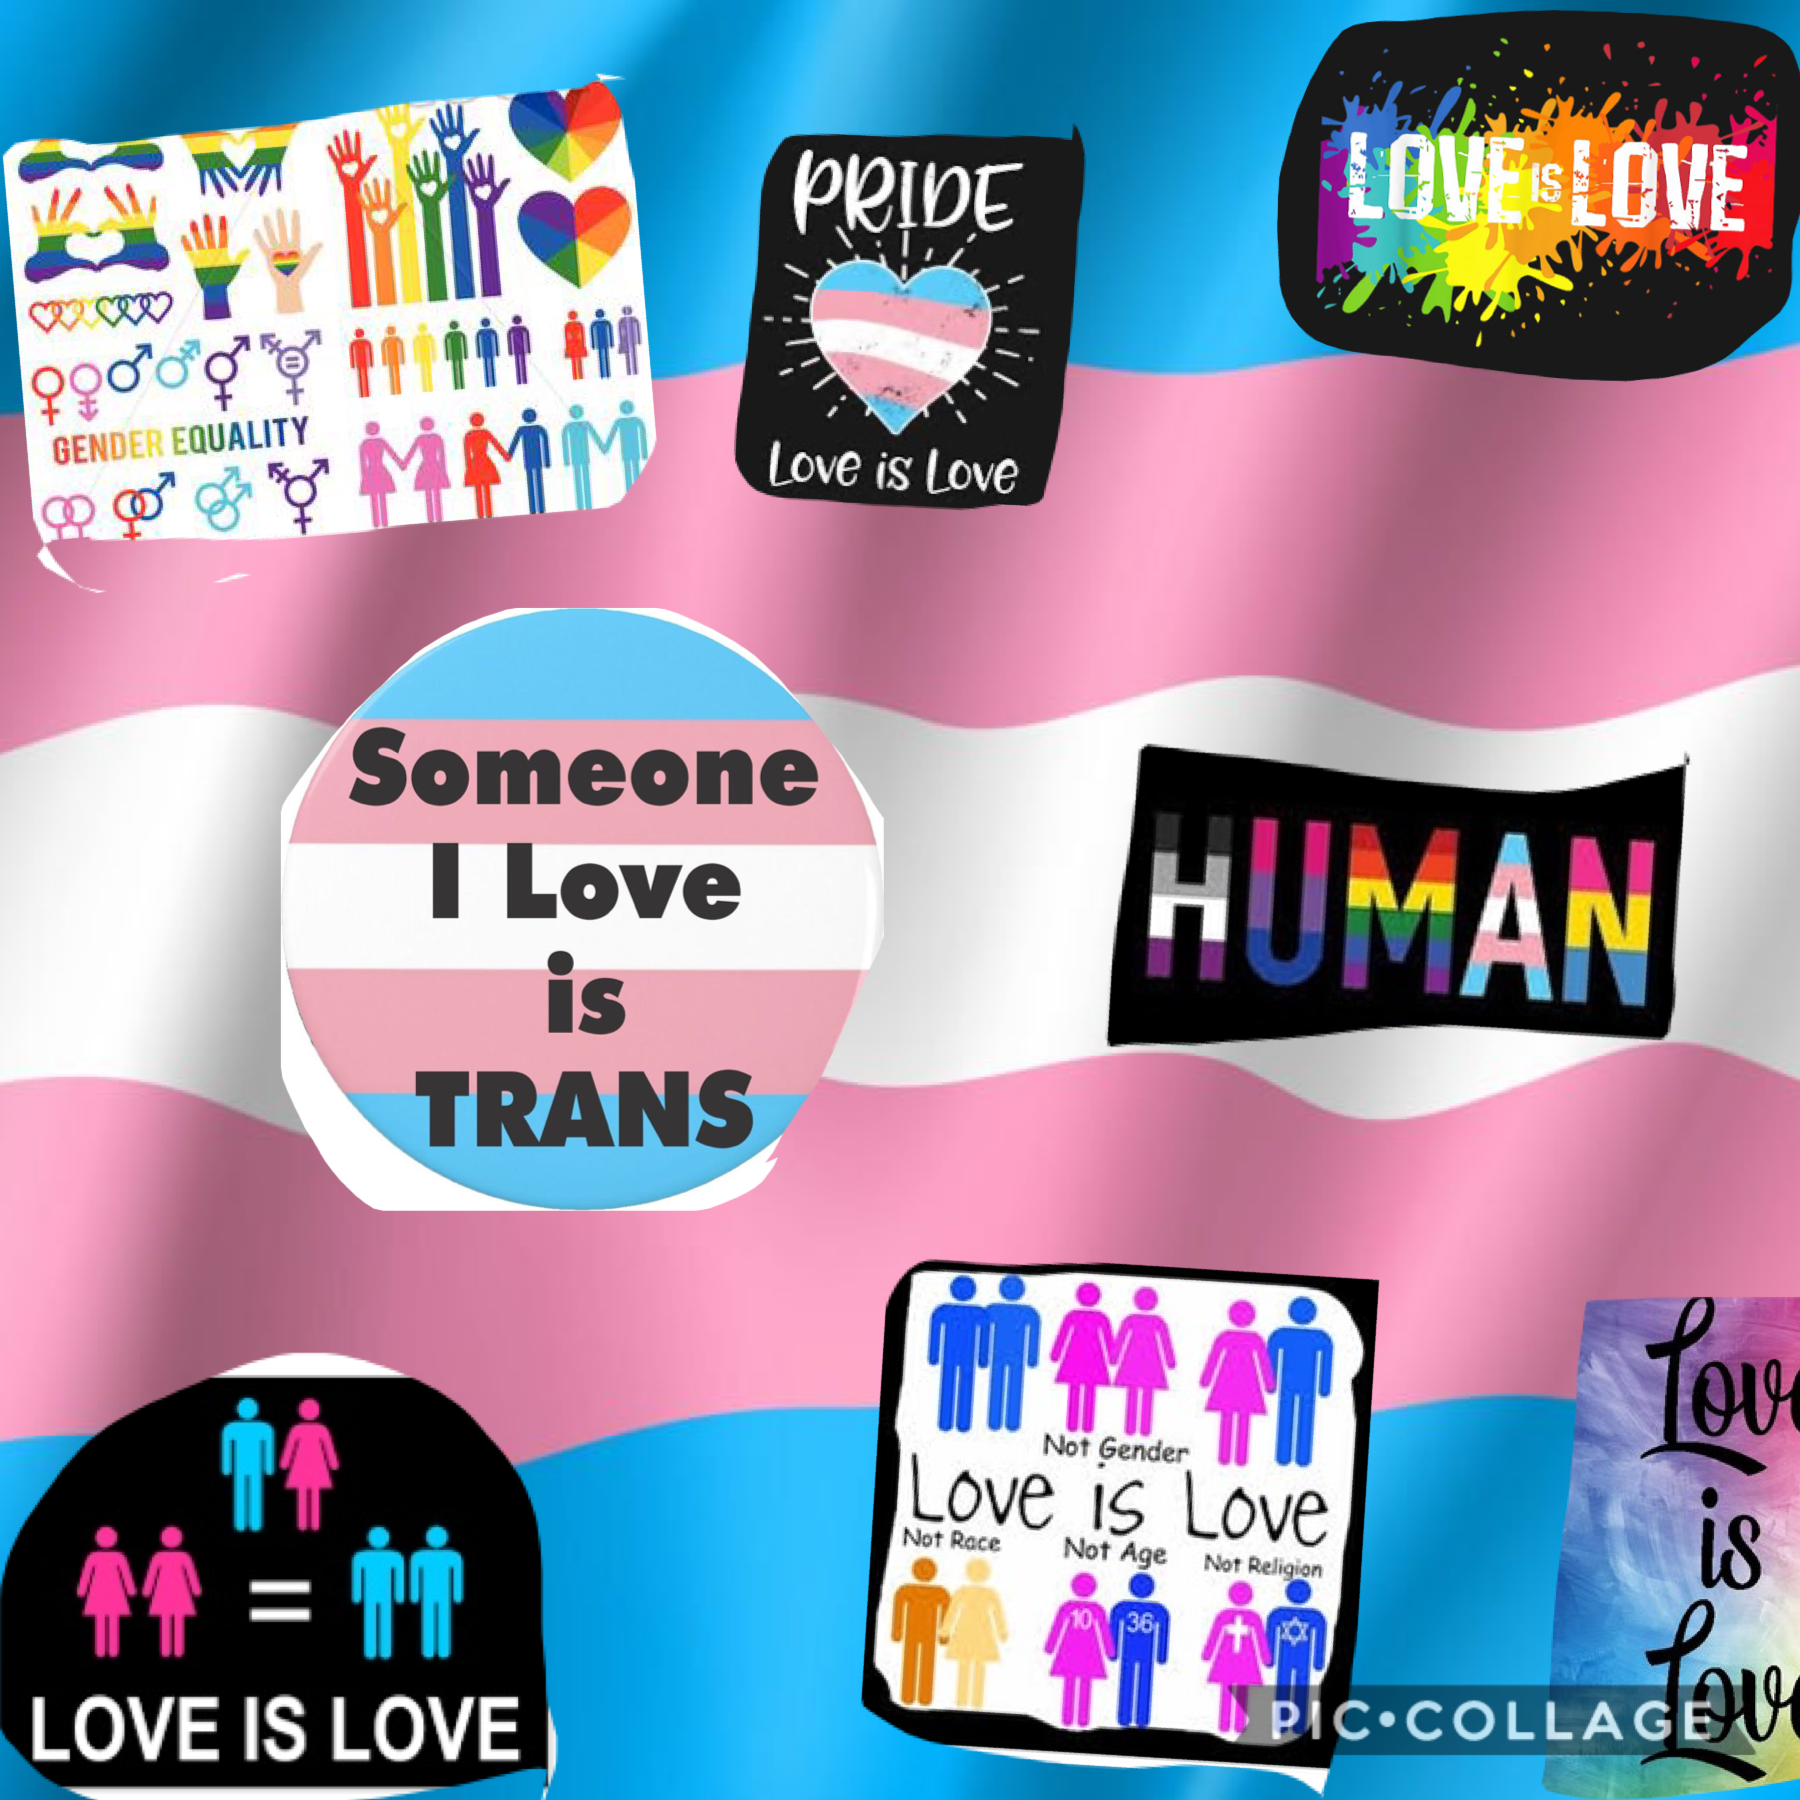 I’m in love with some one that is transgender.......................